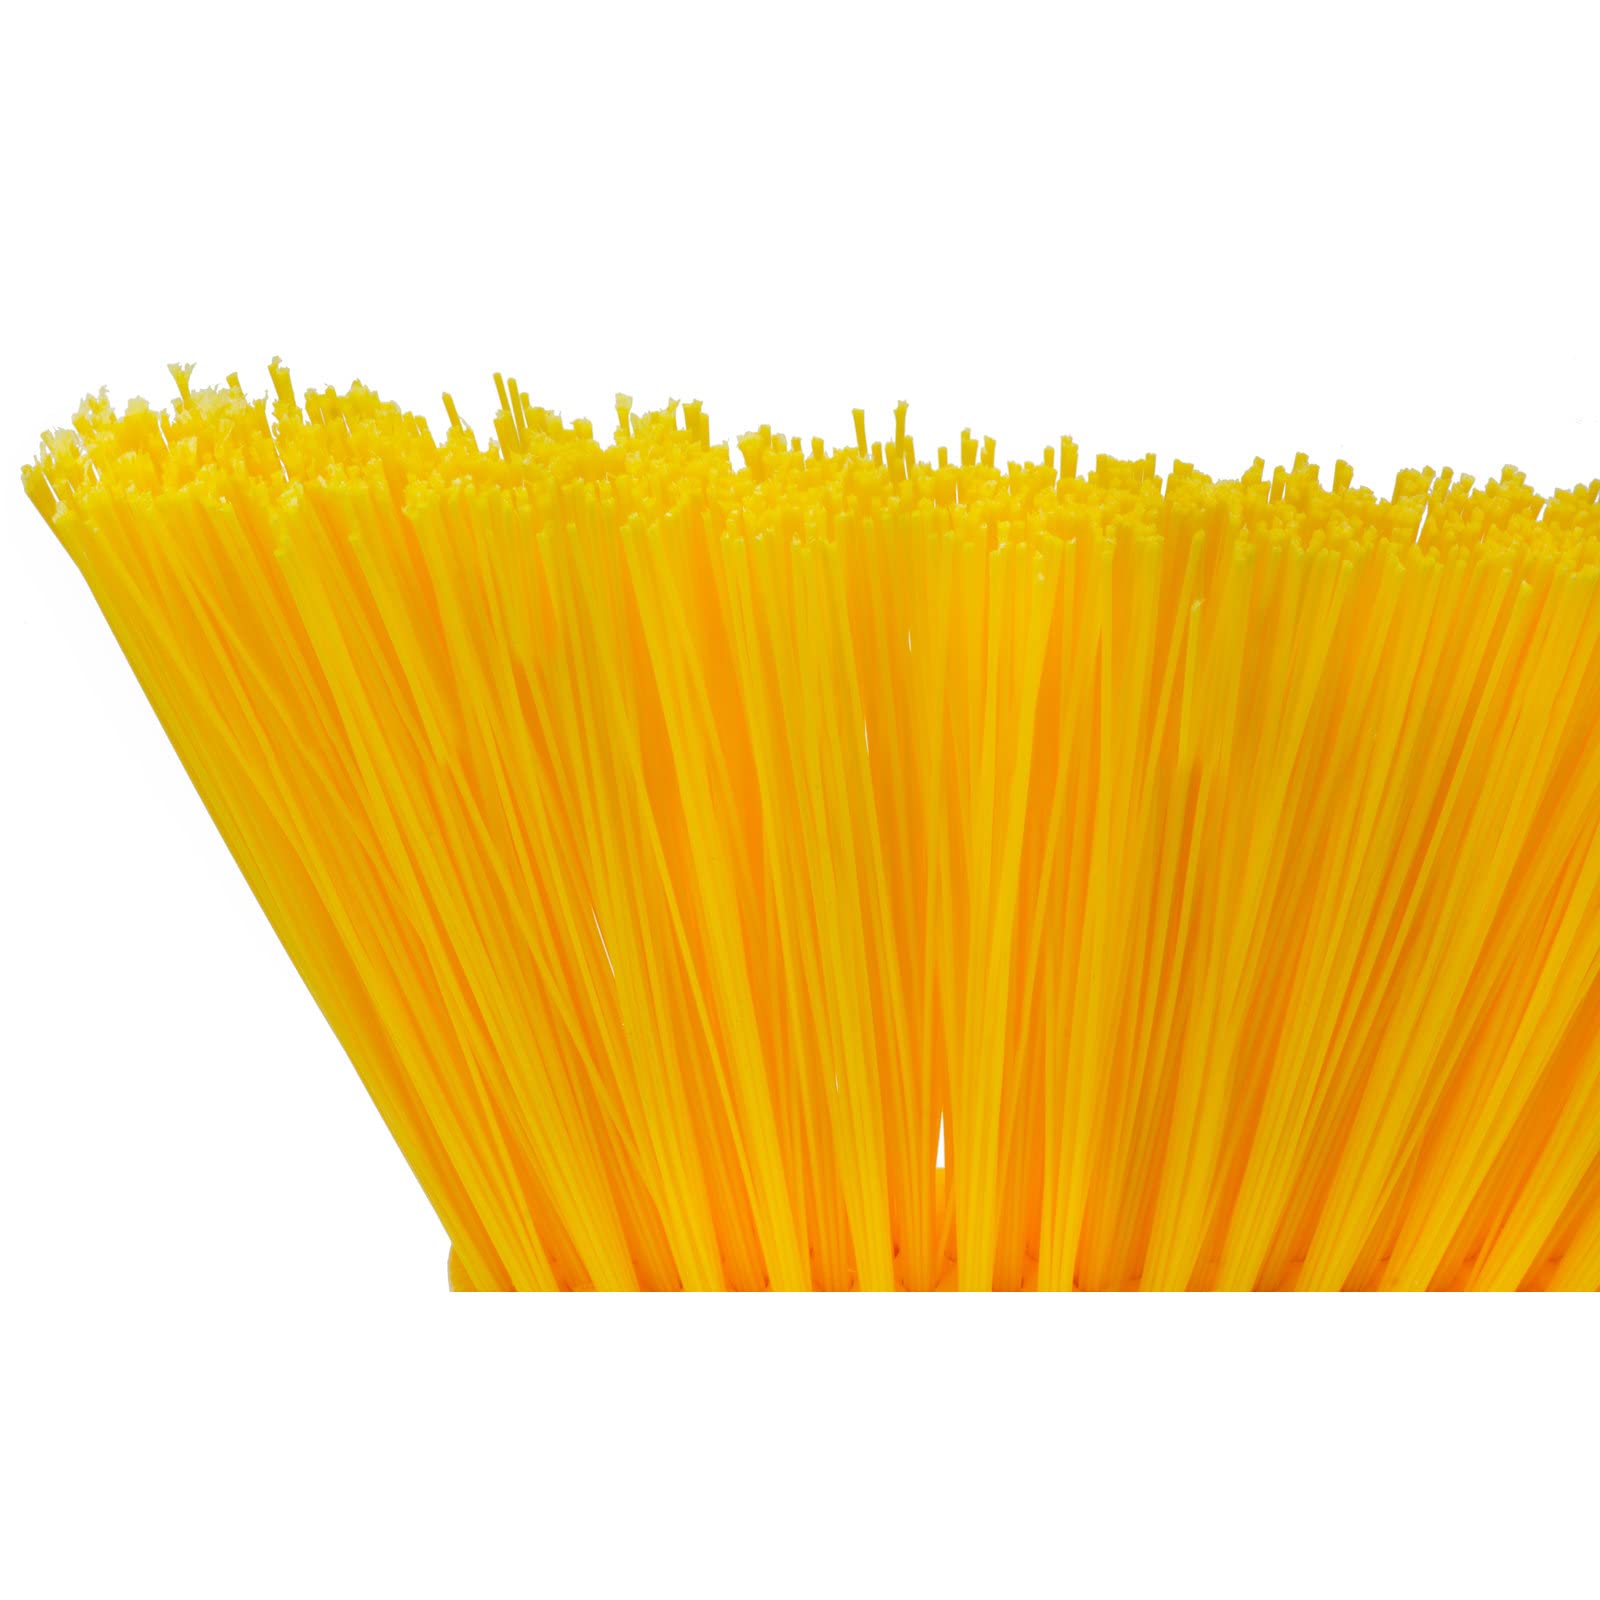 SPARTA Plastic Broom Head, Angled, Un-Flagged for Large Debris Indoor, Outdoor, Home, Restaurant, Lobby, Office, 12 Inches, Yellow, (Pack of 12)